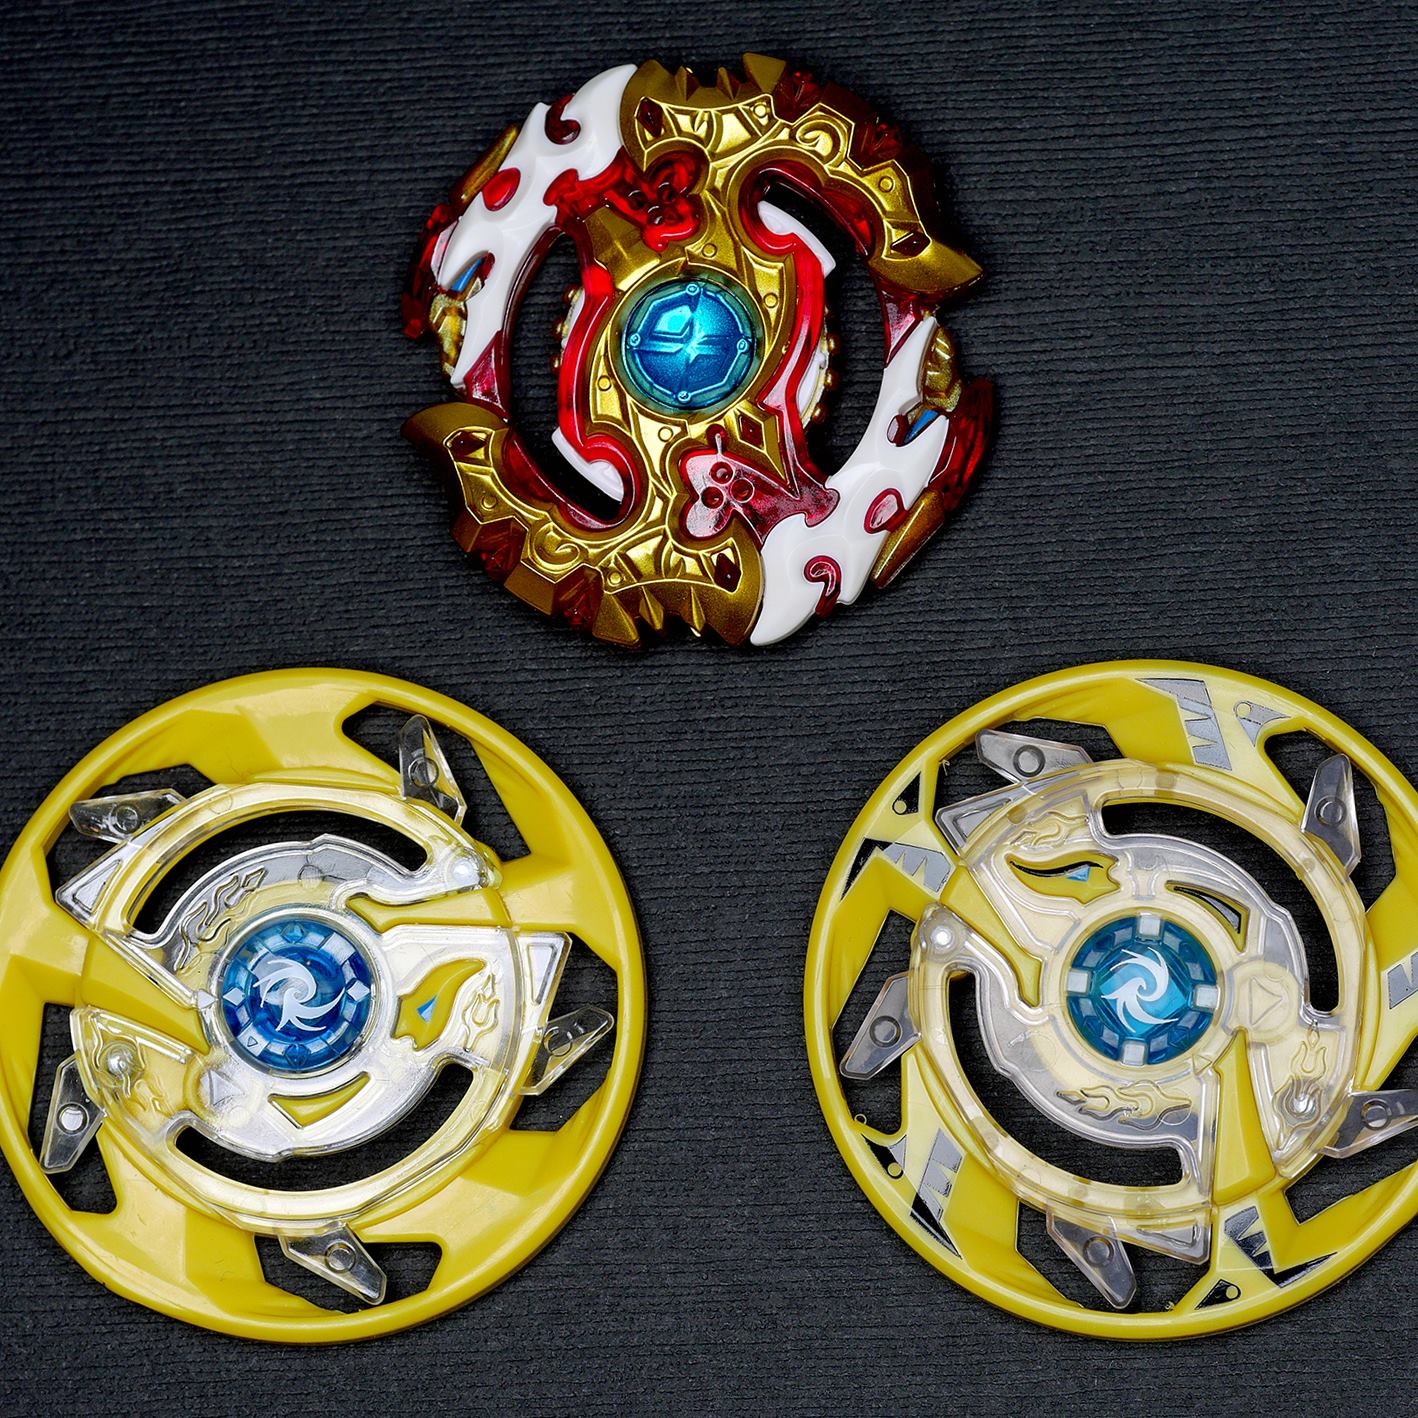 worldbeyblade.org on Twitter: "BREAKING NEWS: under new WBO rulings, the  layers Spriggan Requiem, Maximum Garuda and Garuda G3 have been banned from  WBO #Beyblade events! More details and rulings on Level Chips